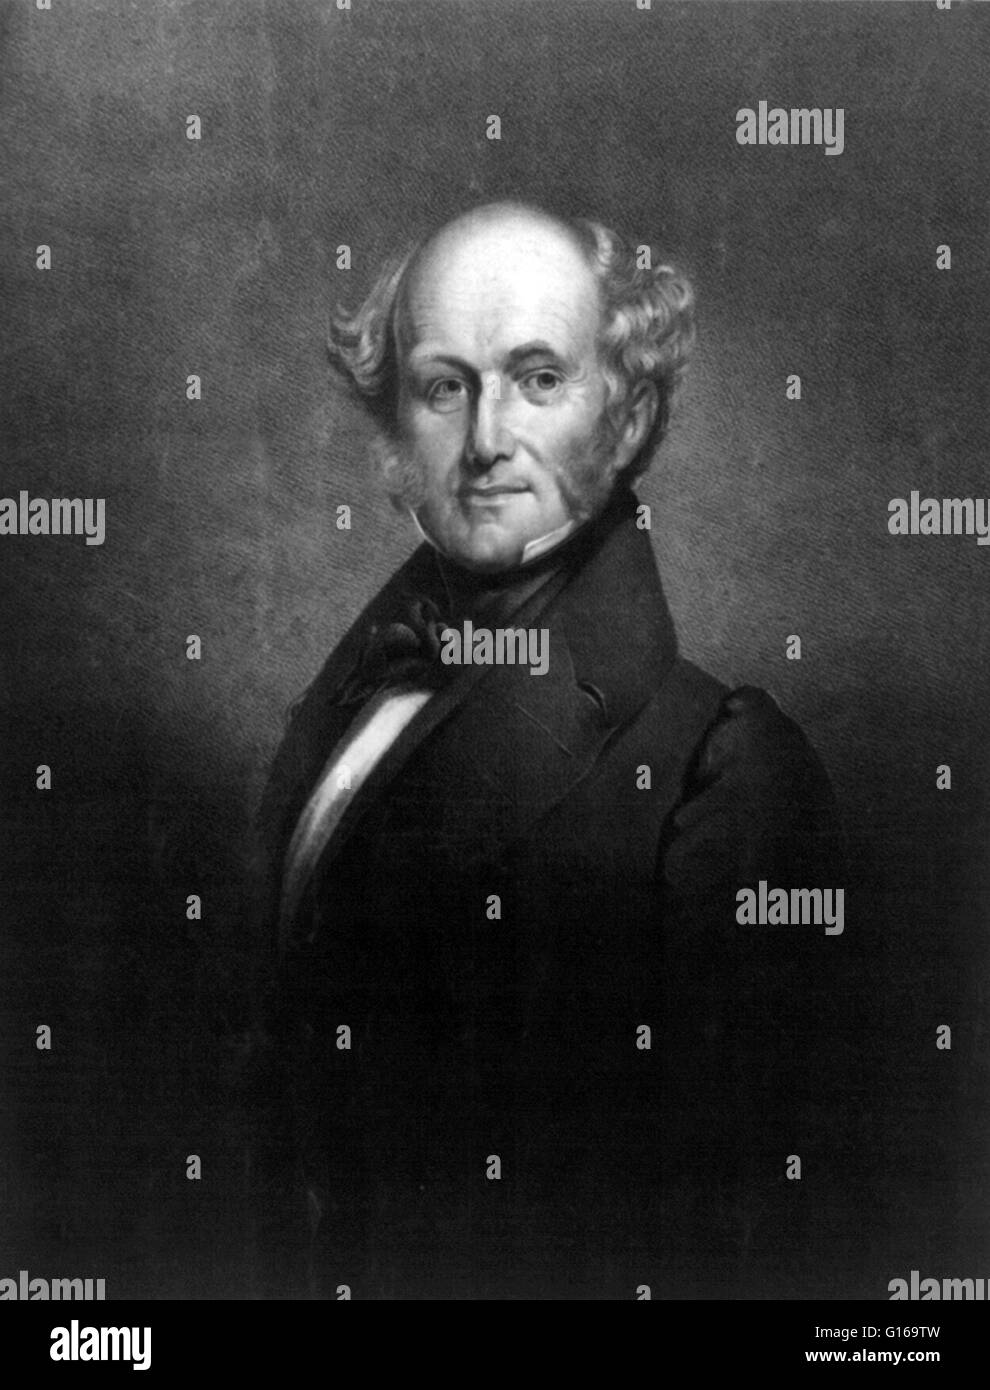 Martin Van Buren (December 5, 1782 - July 24, 1862) was the eighth President of the United States (1837-1841). Before his presidency, he was the eighth Vice President (1833-1837) and the tenth Secretary of State (1829-1831), both under Andrew Jackson. He Stock Photo